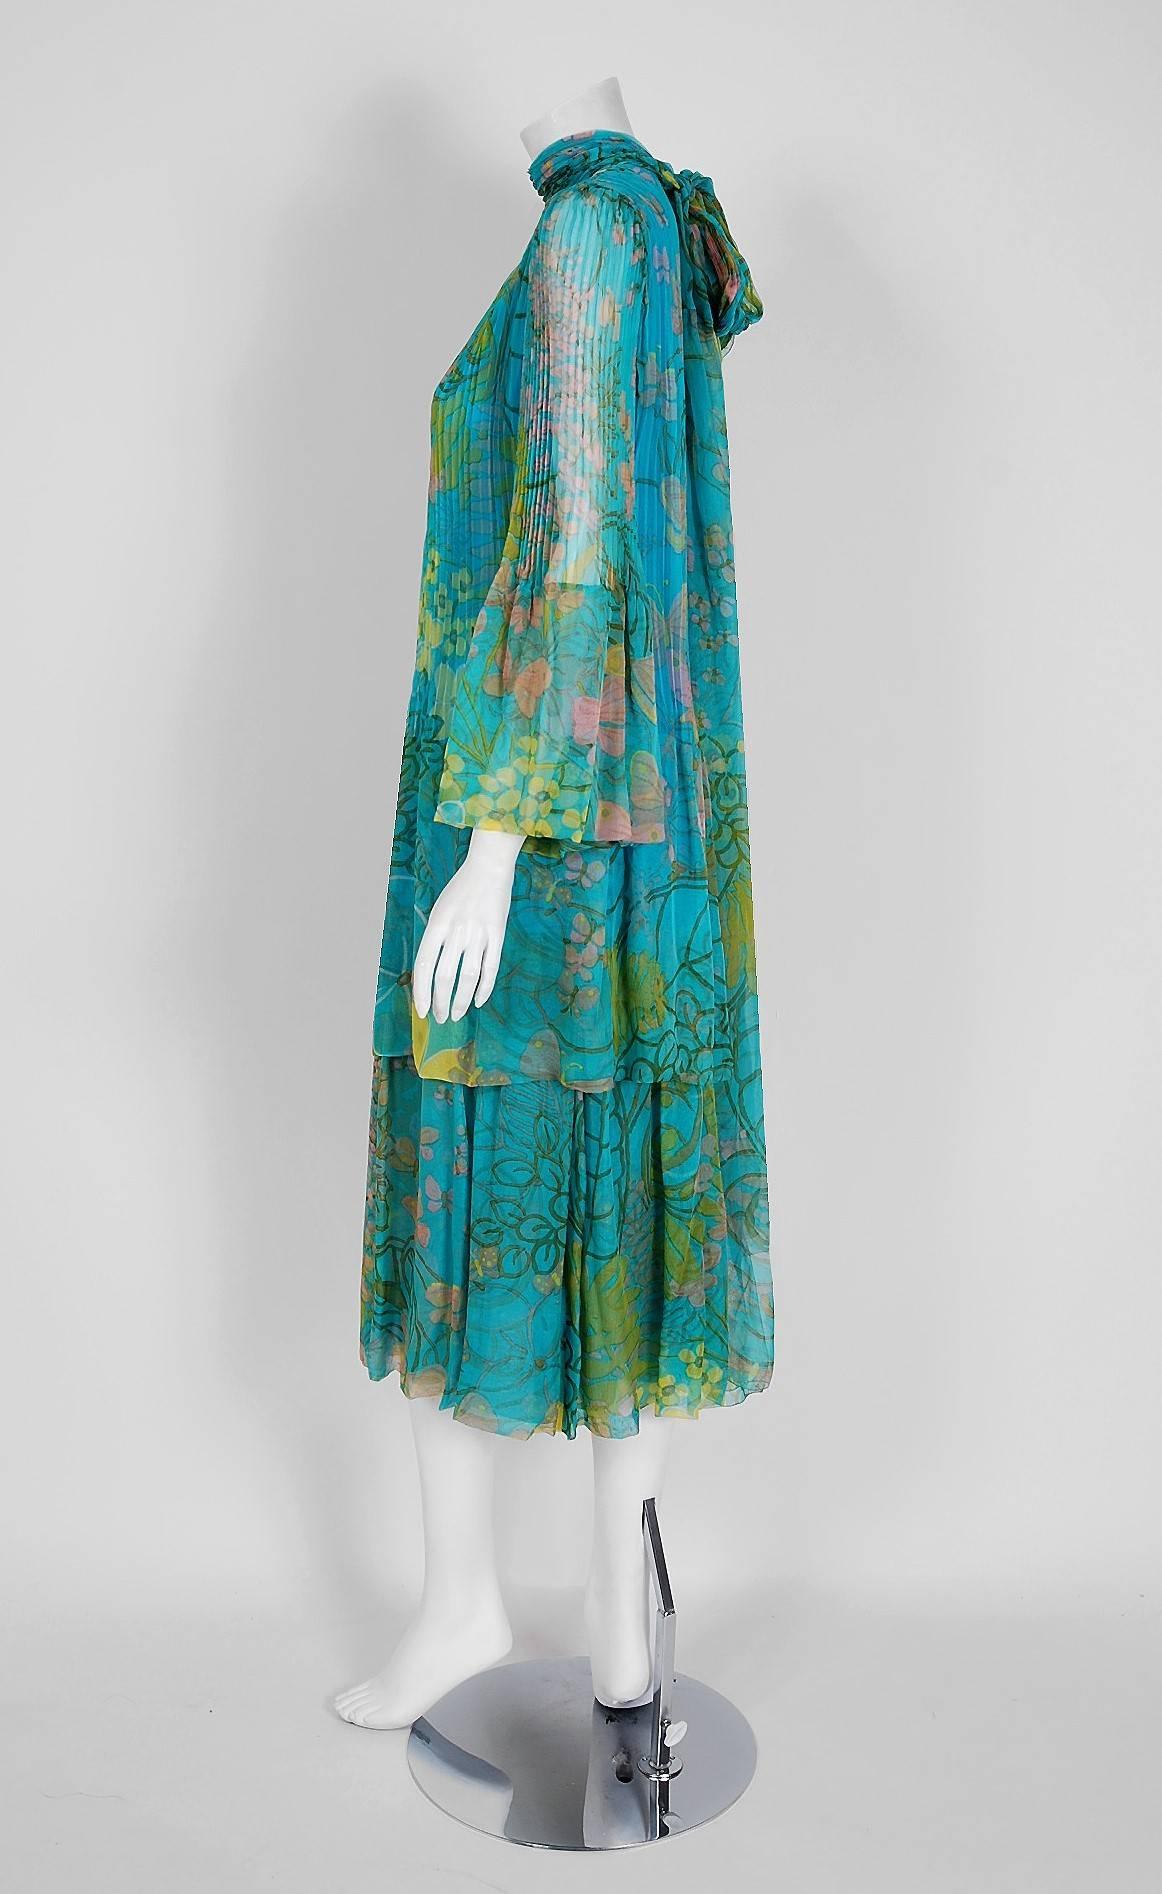 Incredibly rare and highly collectible Edward Molyneux silk-chiffon dress from his 1968 collection. After a period working for the British fashion designer Lucile, Molyneux opened his fashion house in Paris and became known for his 